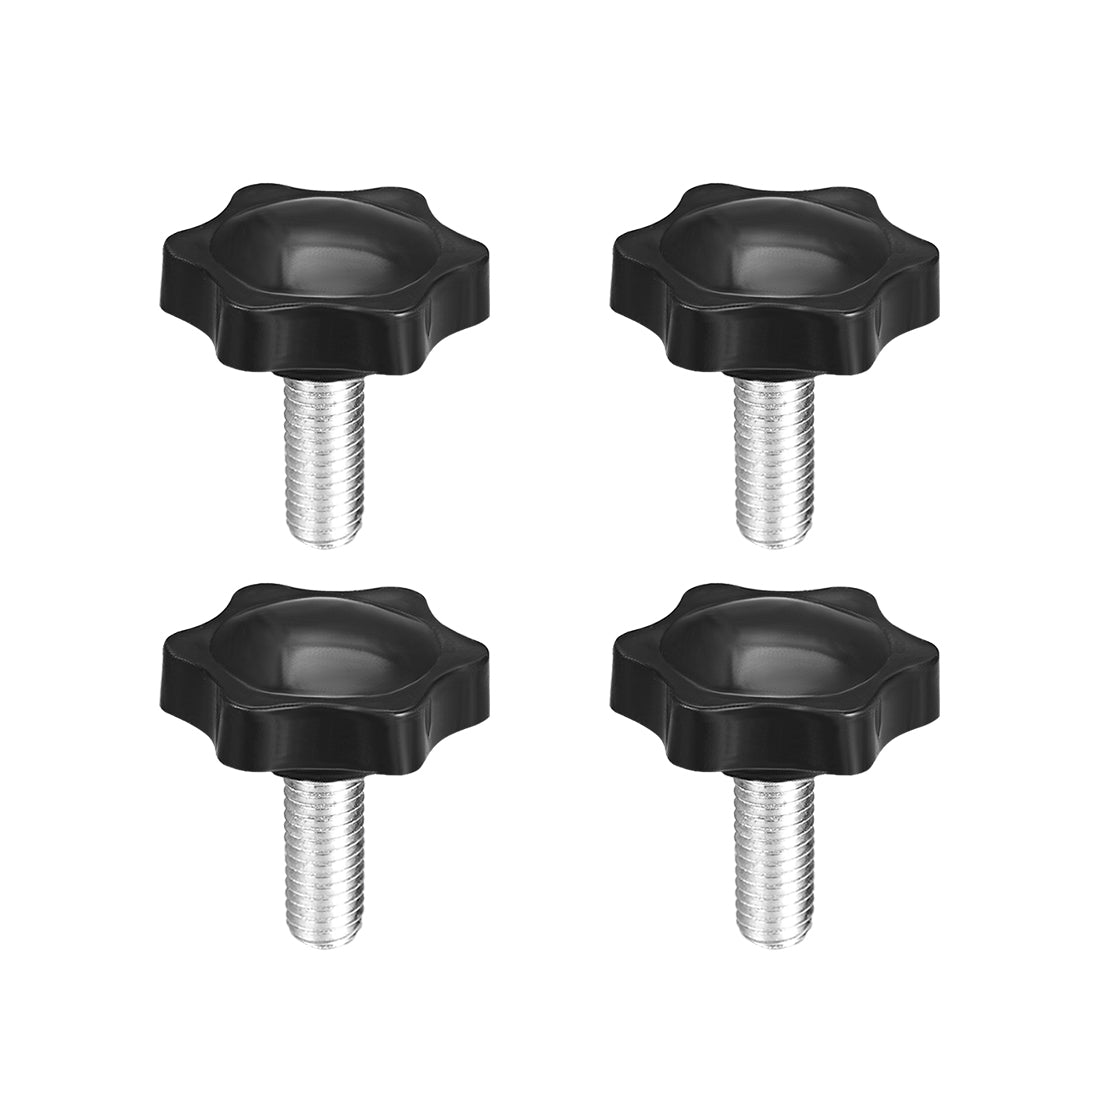 uxcell Uxcell Clamping Screw Knob Plum Hex Shaped Grips Star Knob Male Thread, 4pcs